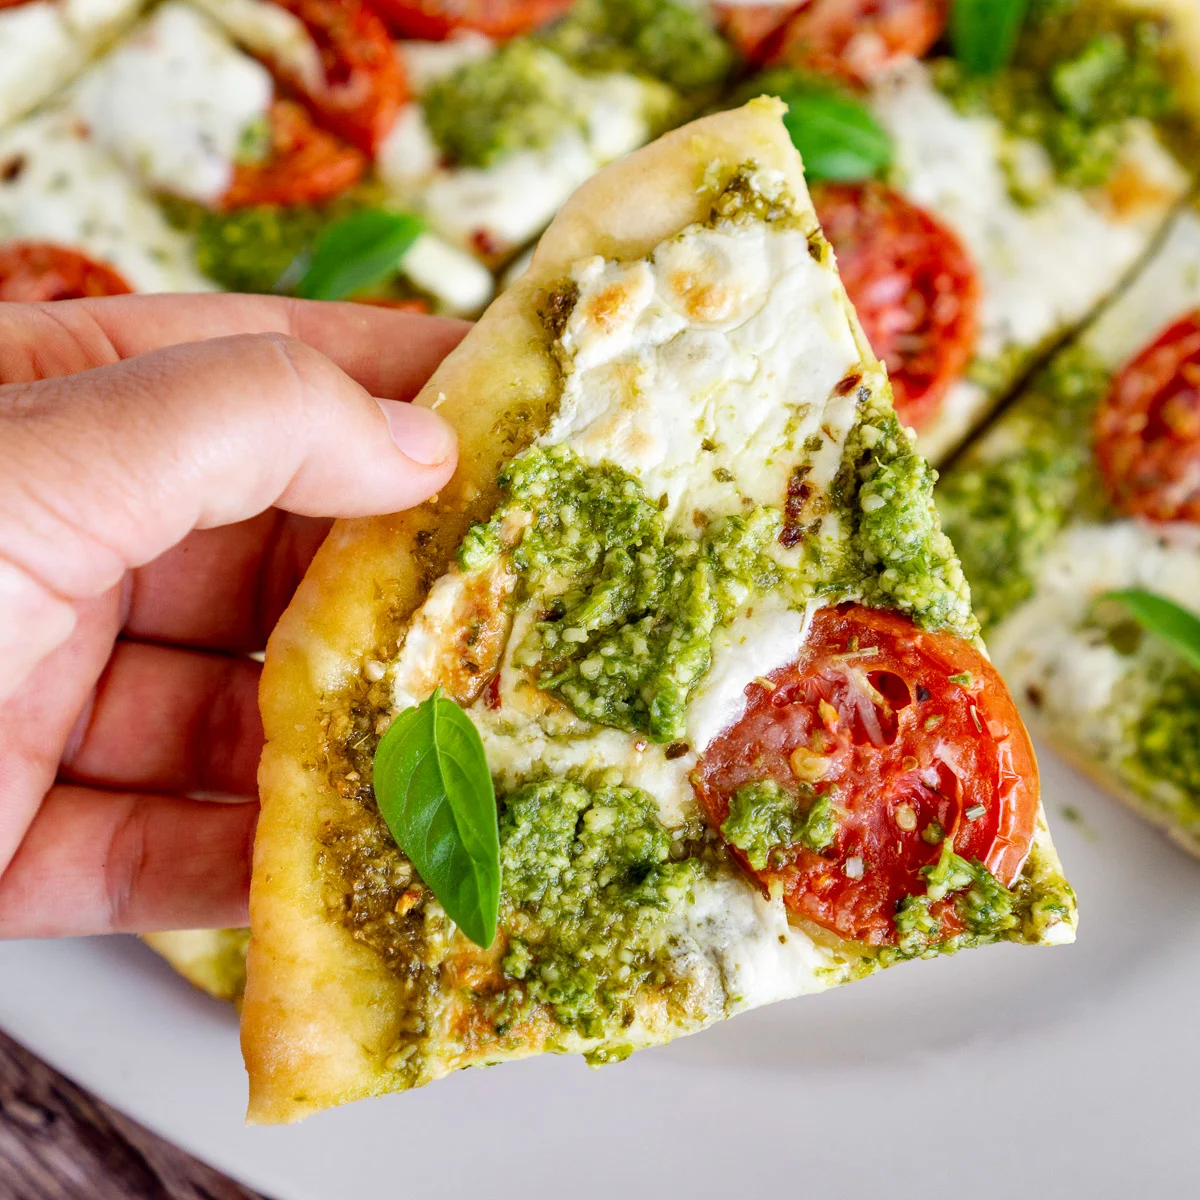 slice of pesto pizza made with 2 ingredient pizza dough